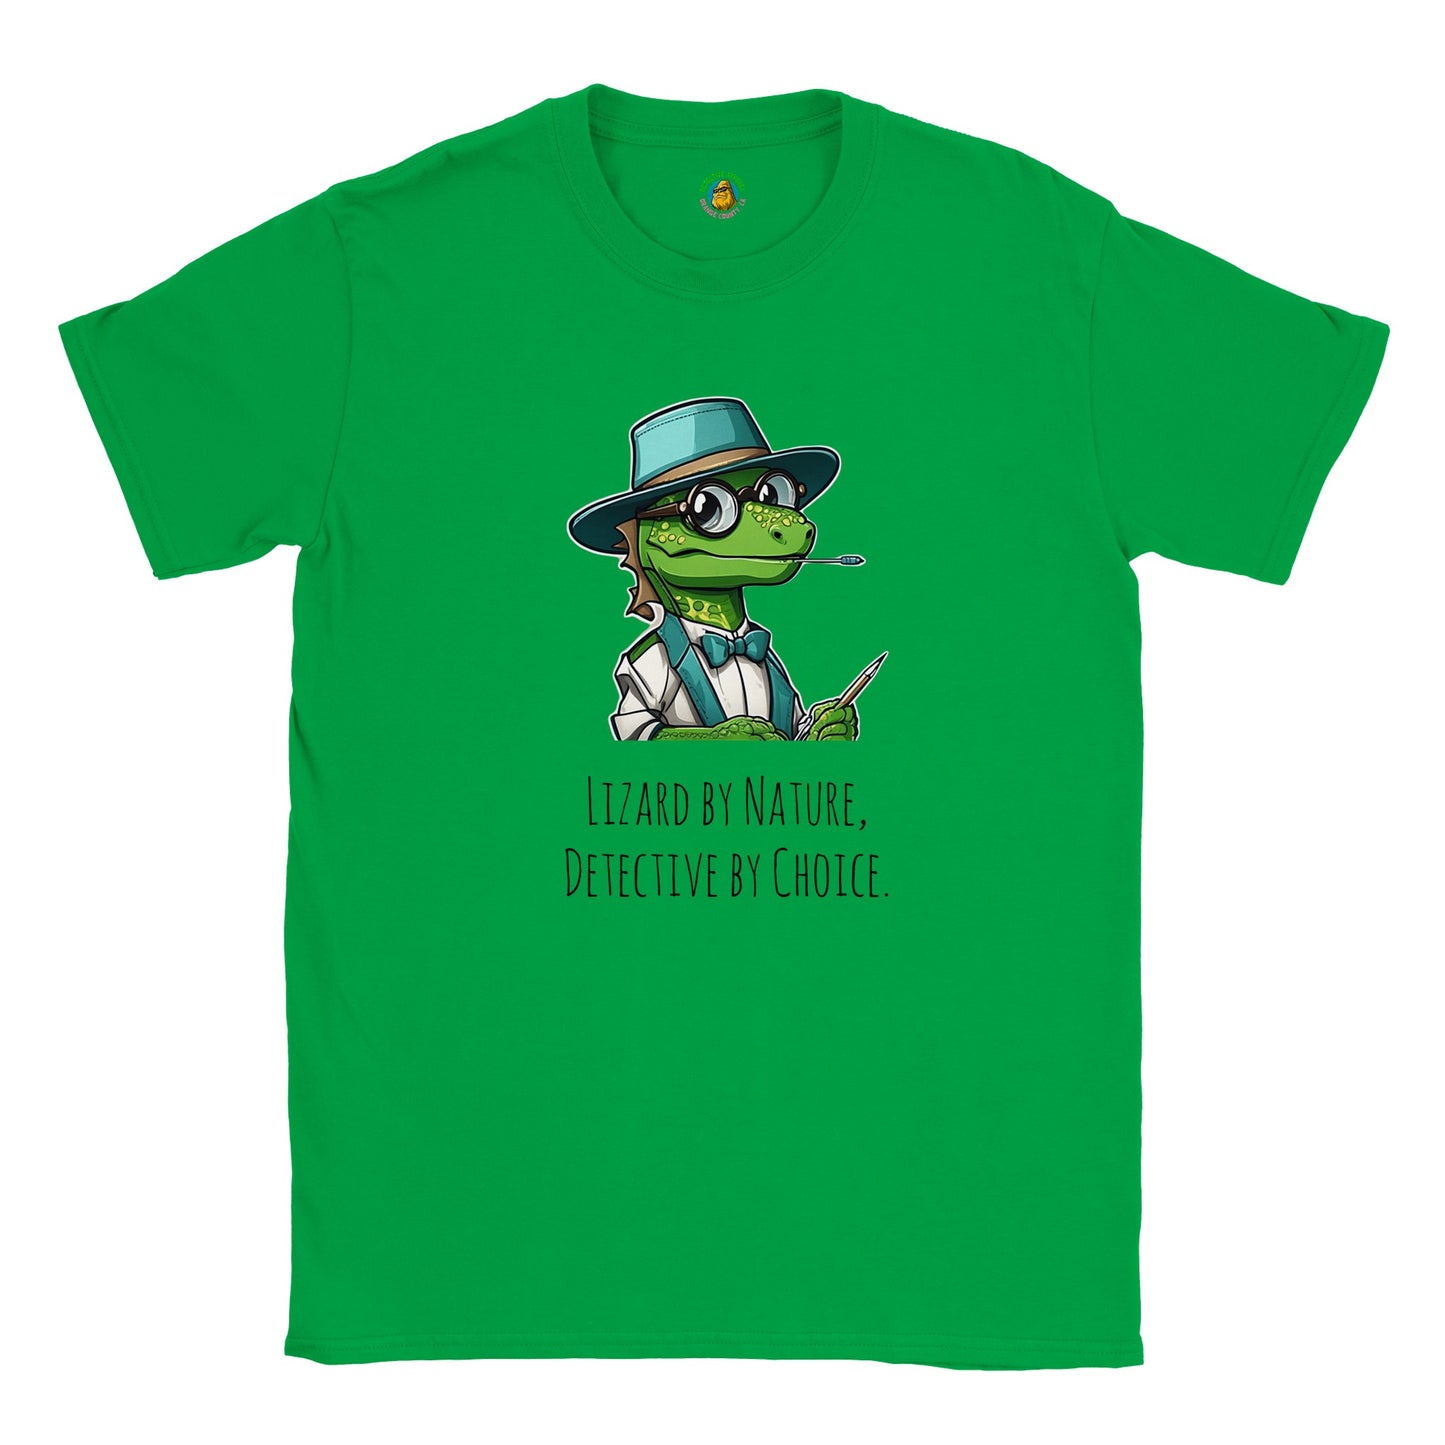 Classic Kids Crewneck T-shirt - Lizard By Nature, Detective By Choice.